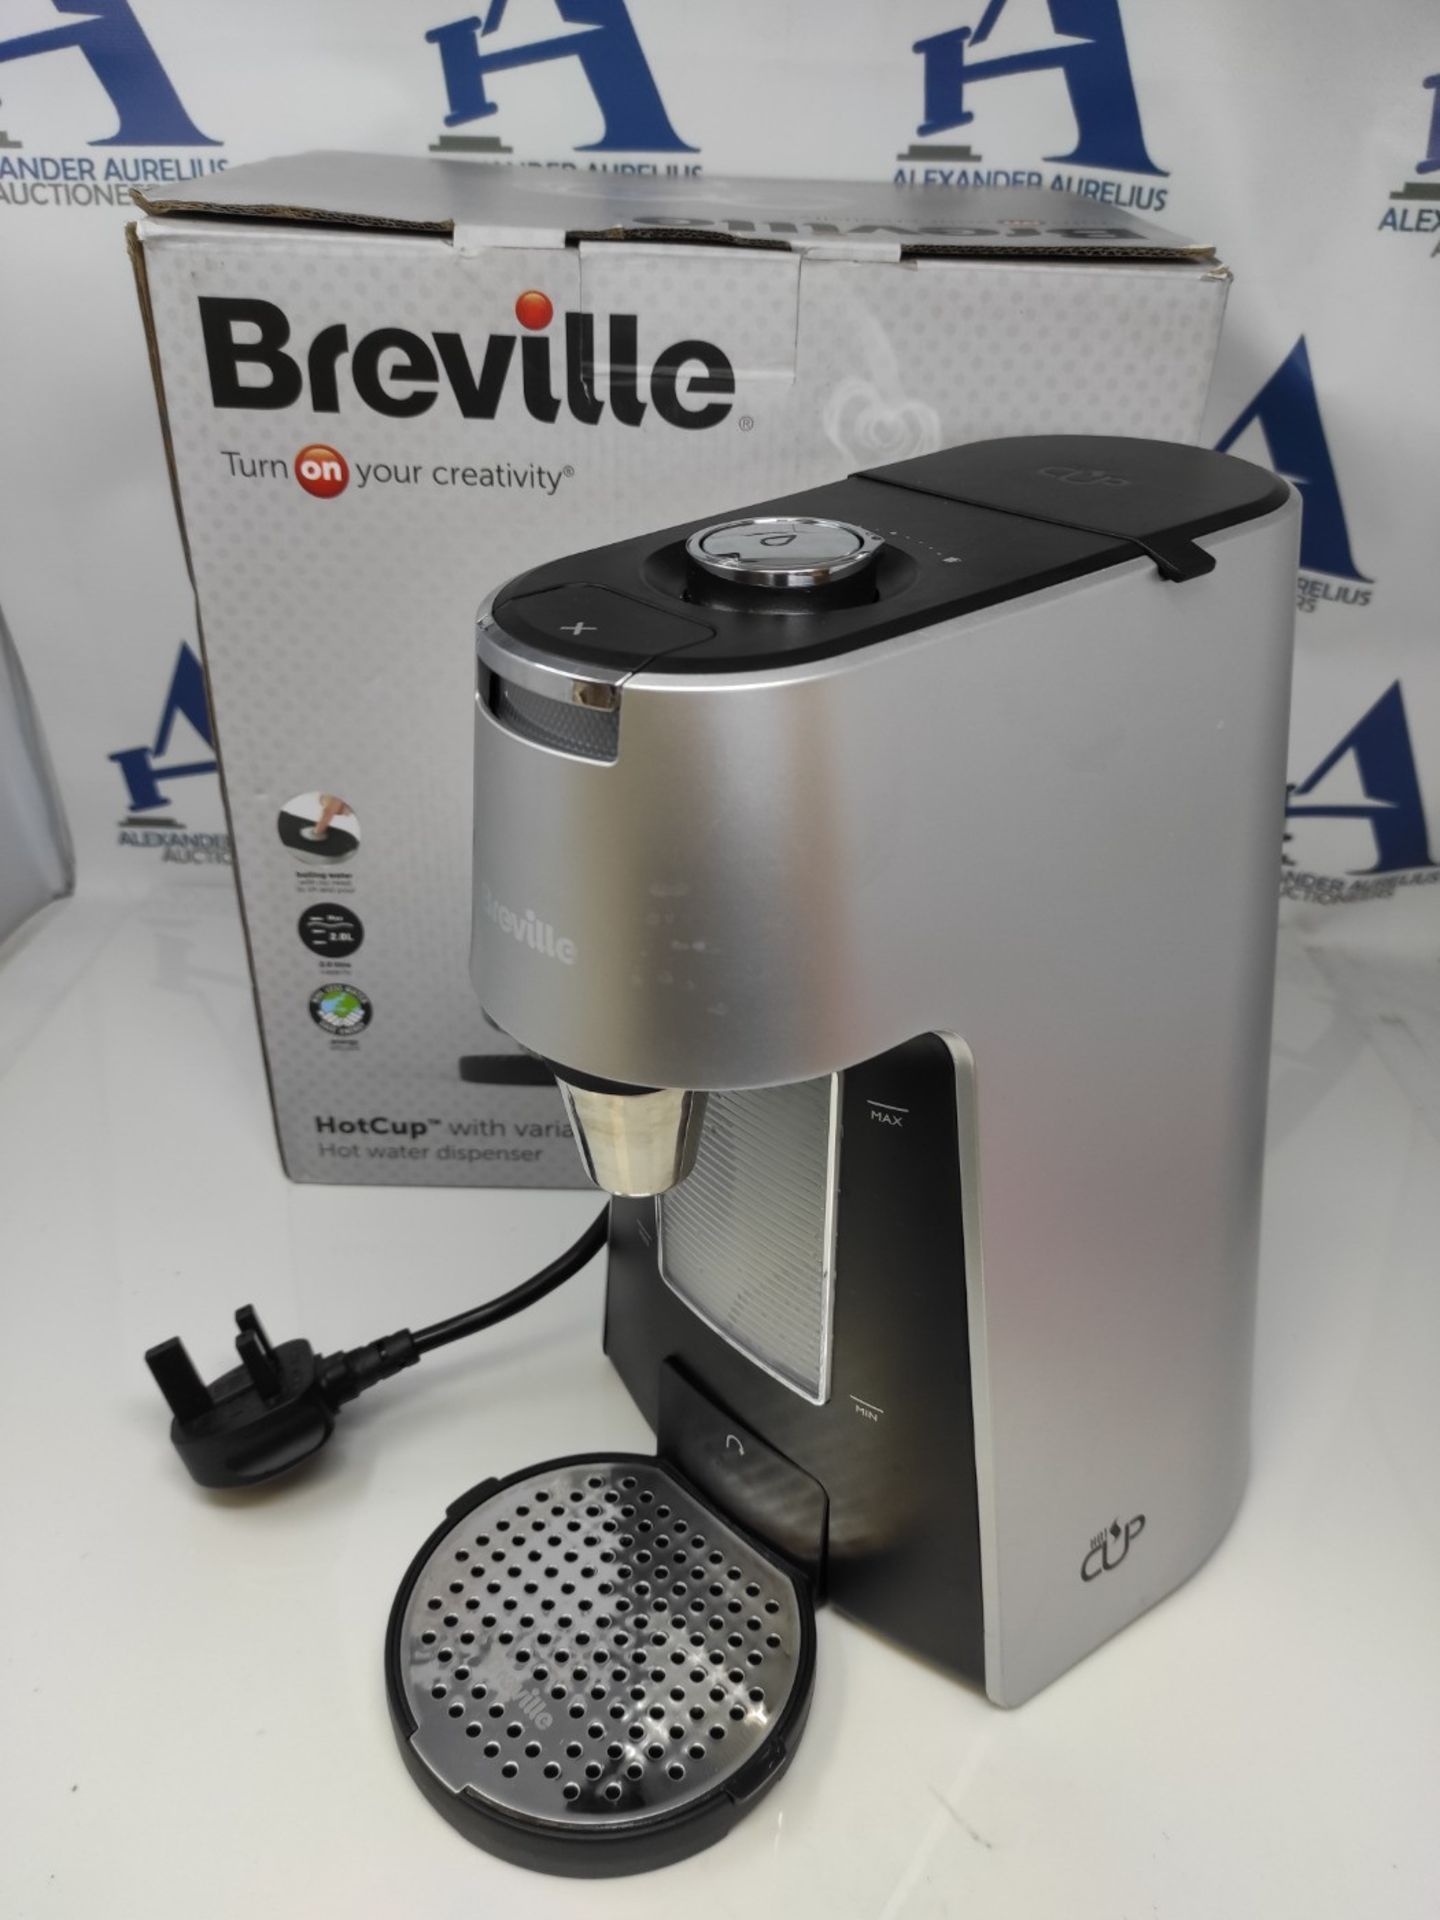 RRP £59.00 Breville HotCup Hot Water Dispenser | 3 kW Fast Boil | Variable Dispense and Height Ad - Image 2 of 2